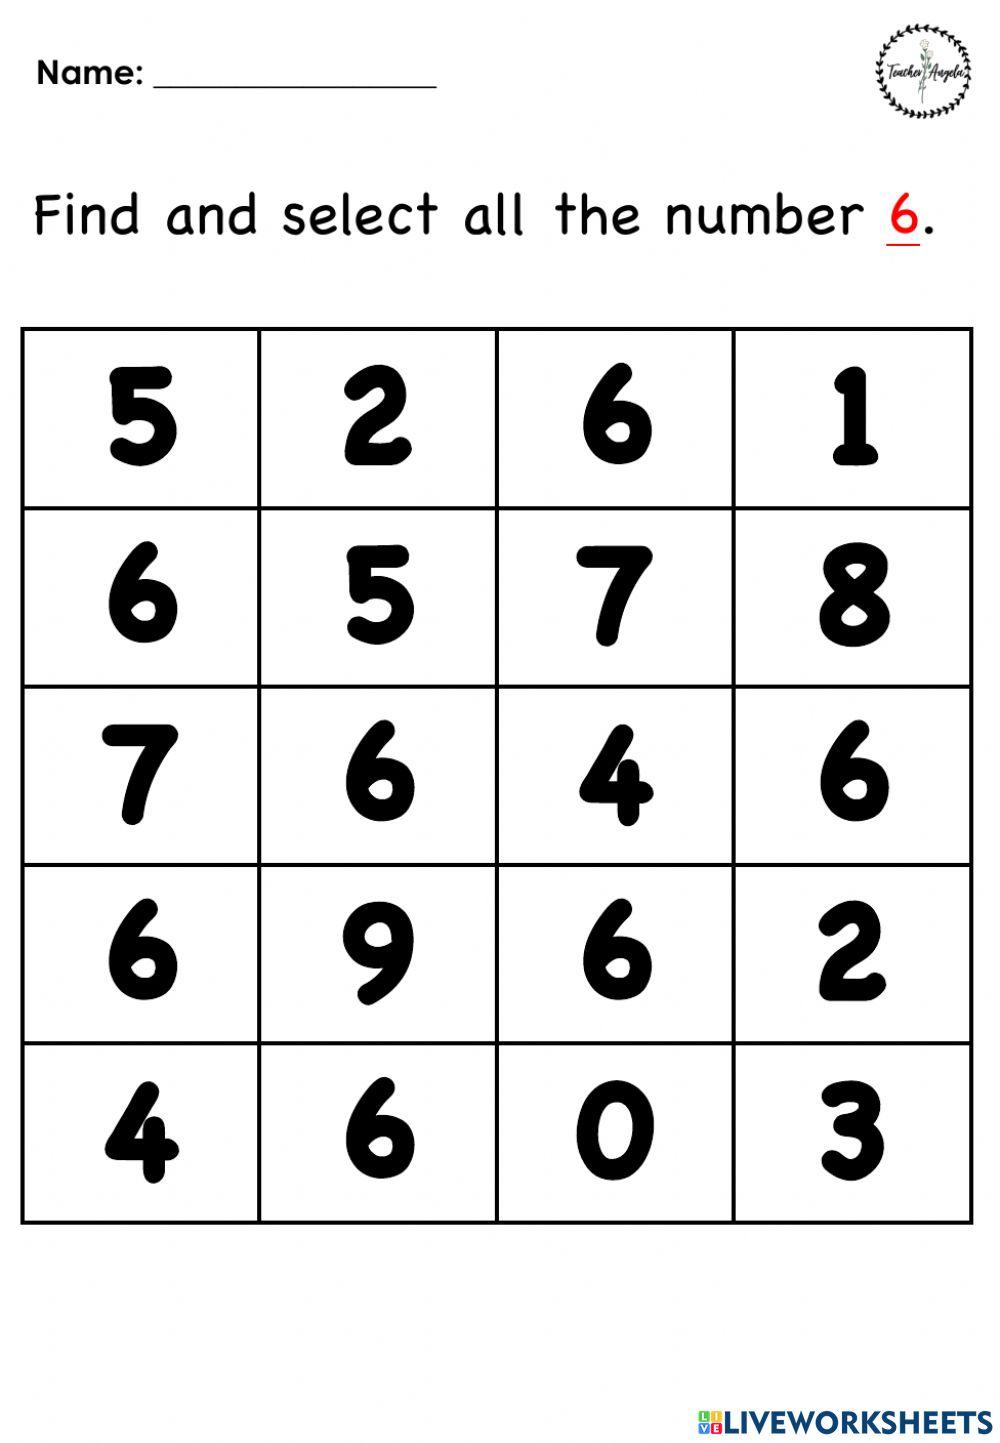 Find the number 6